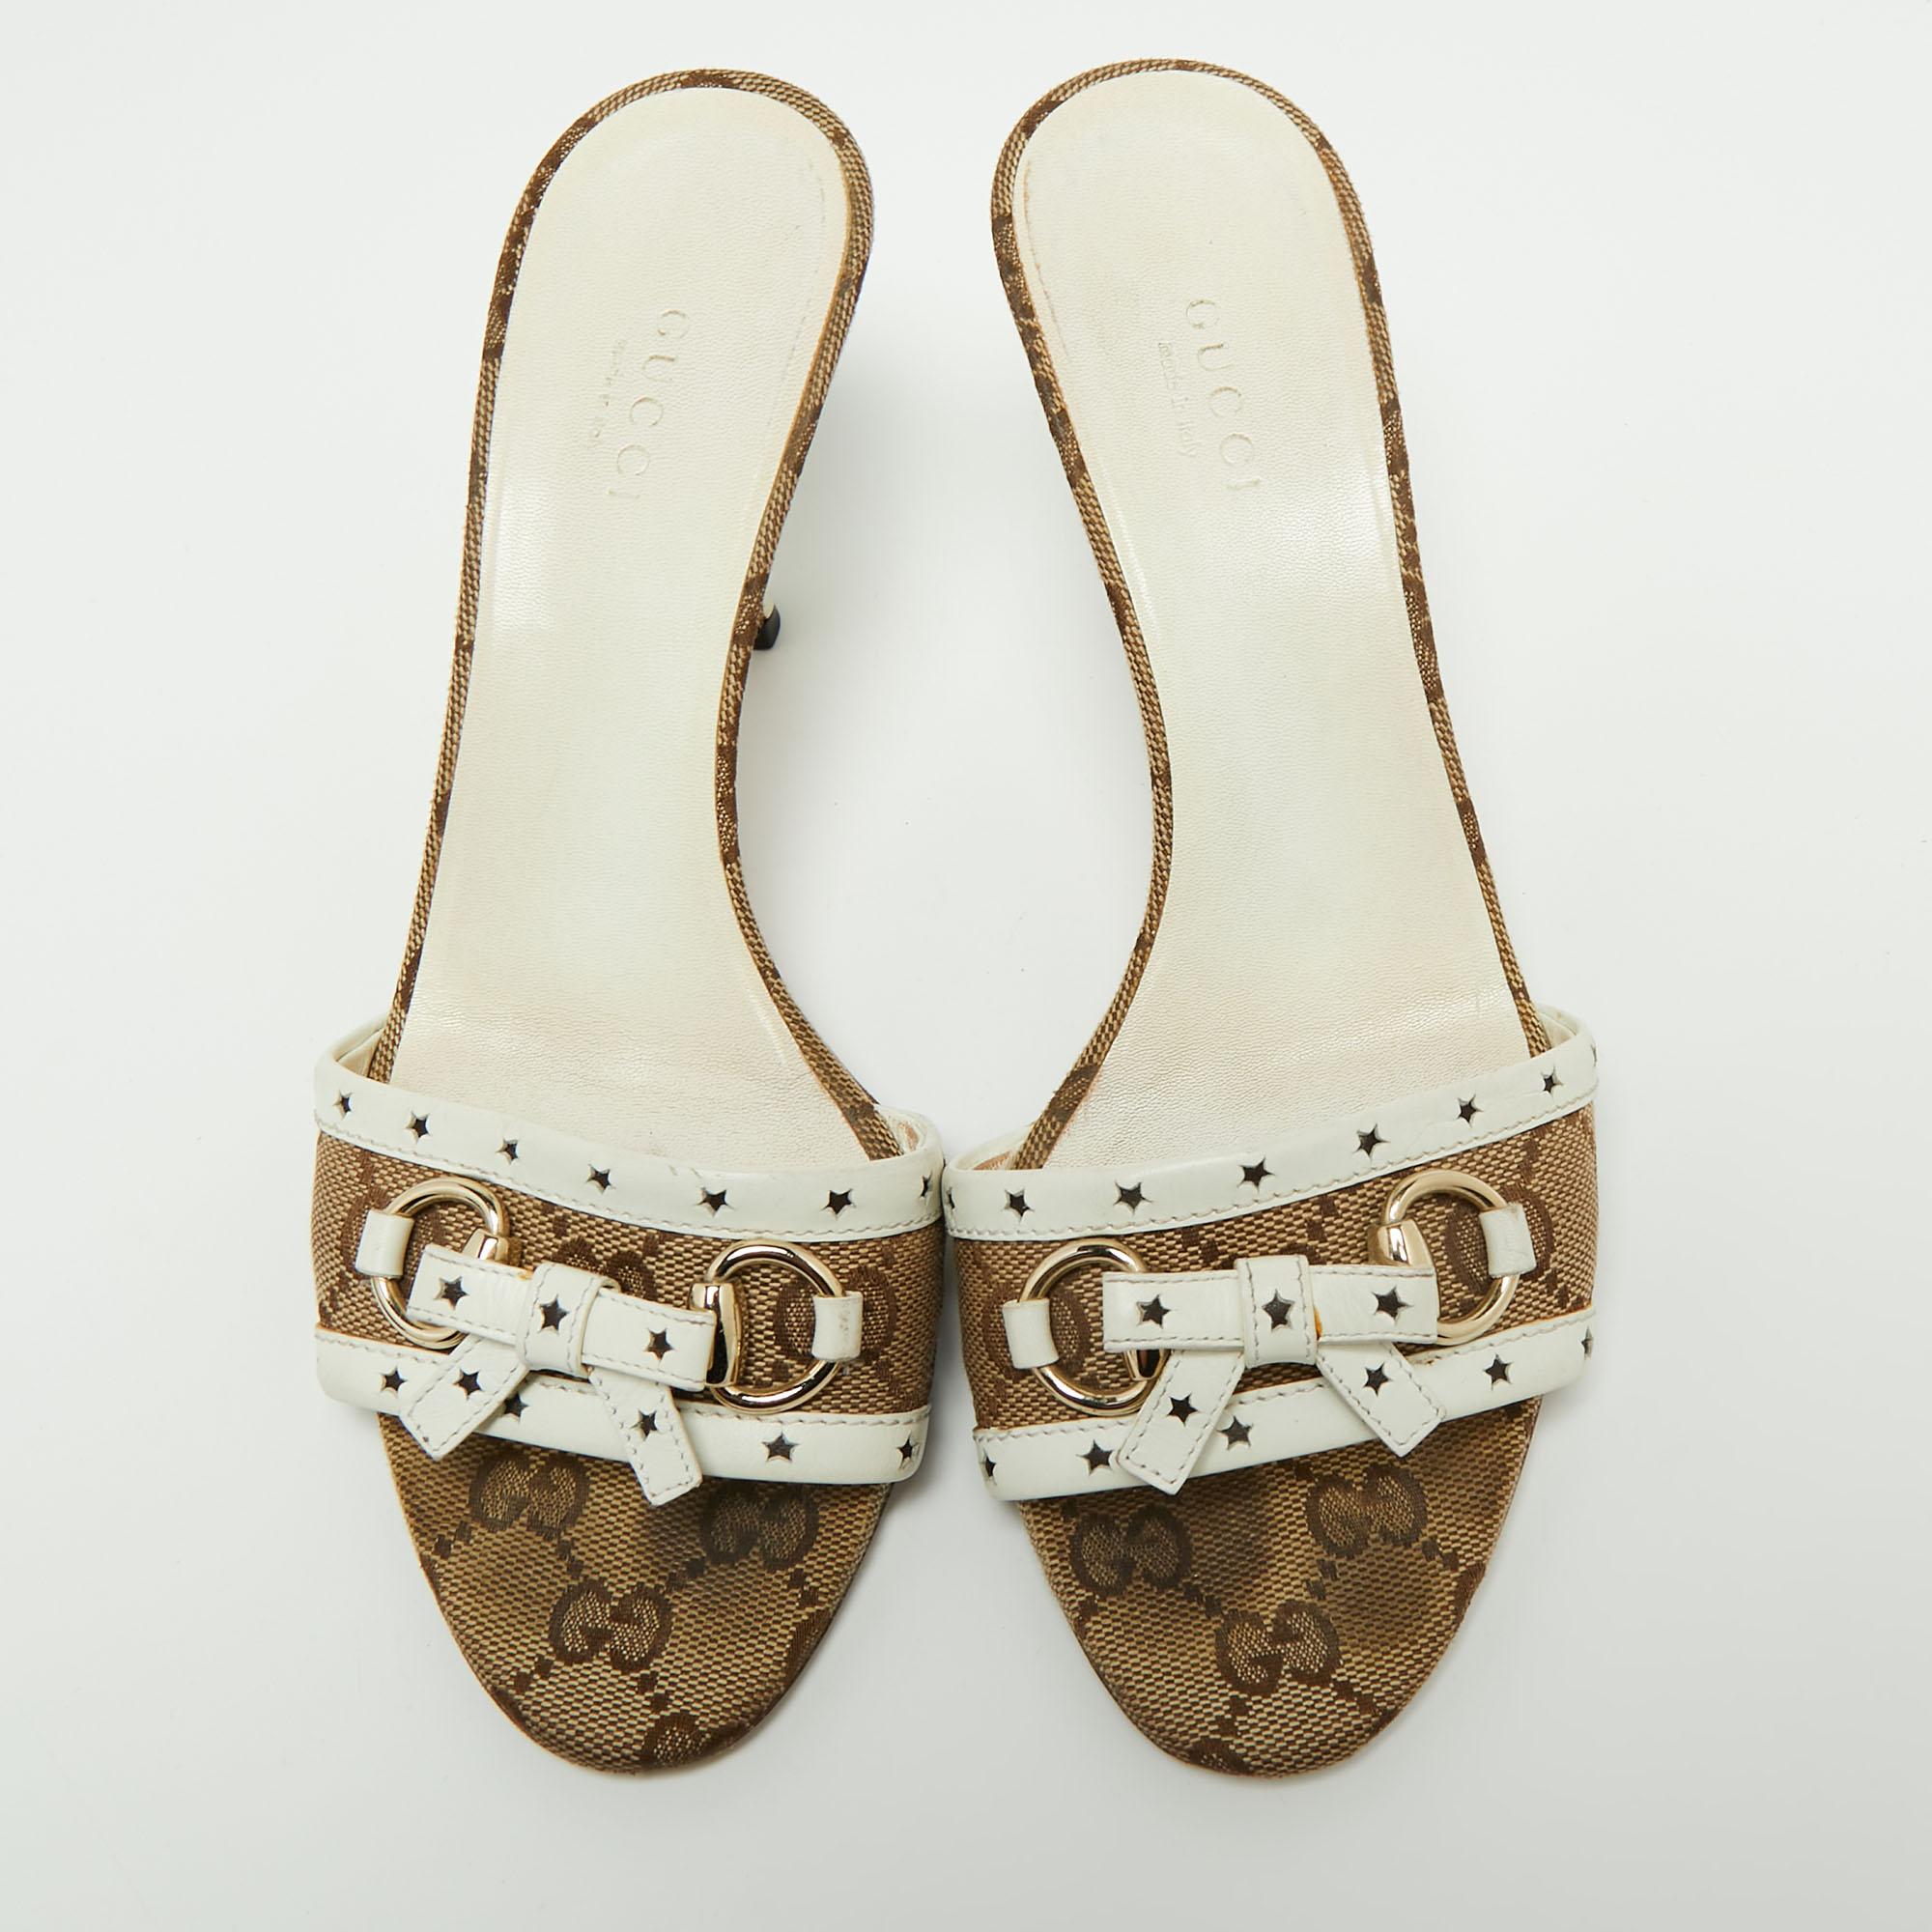 Be it casual or formal outings, these slide sandals from Gucci will add the right amount of elegance and poise to your ensemble. They are crafted from brown-white GG canvas and leather, with a gold-toned bow and logo motif placed on the upper. Their